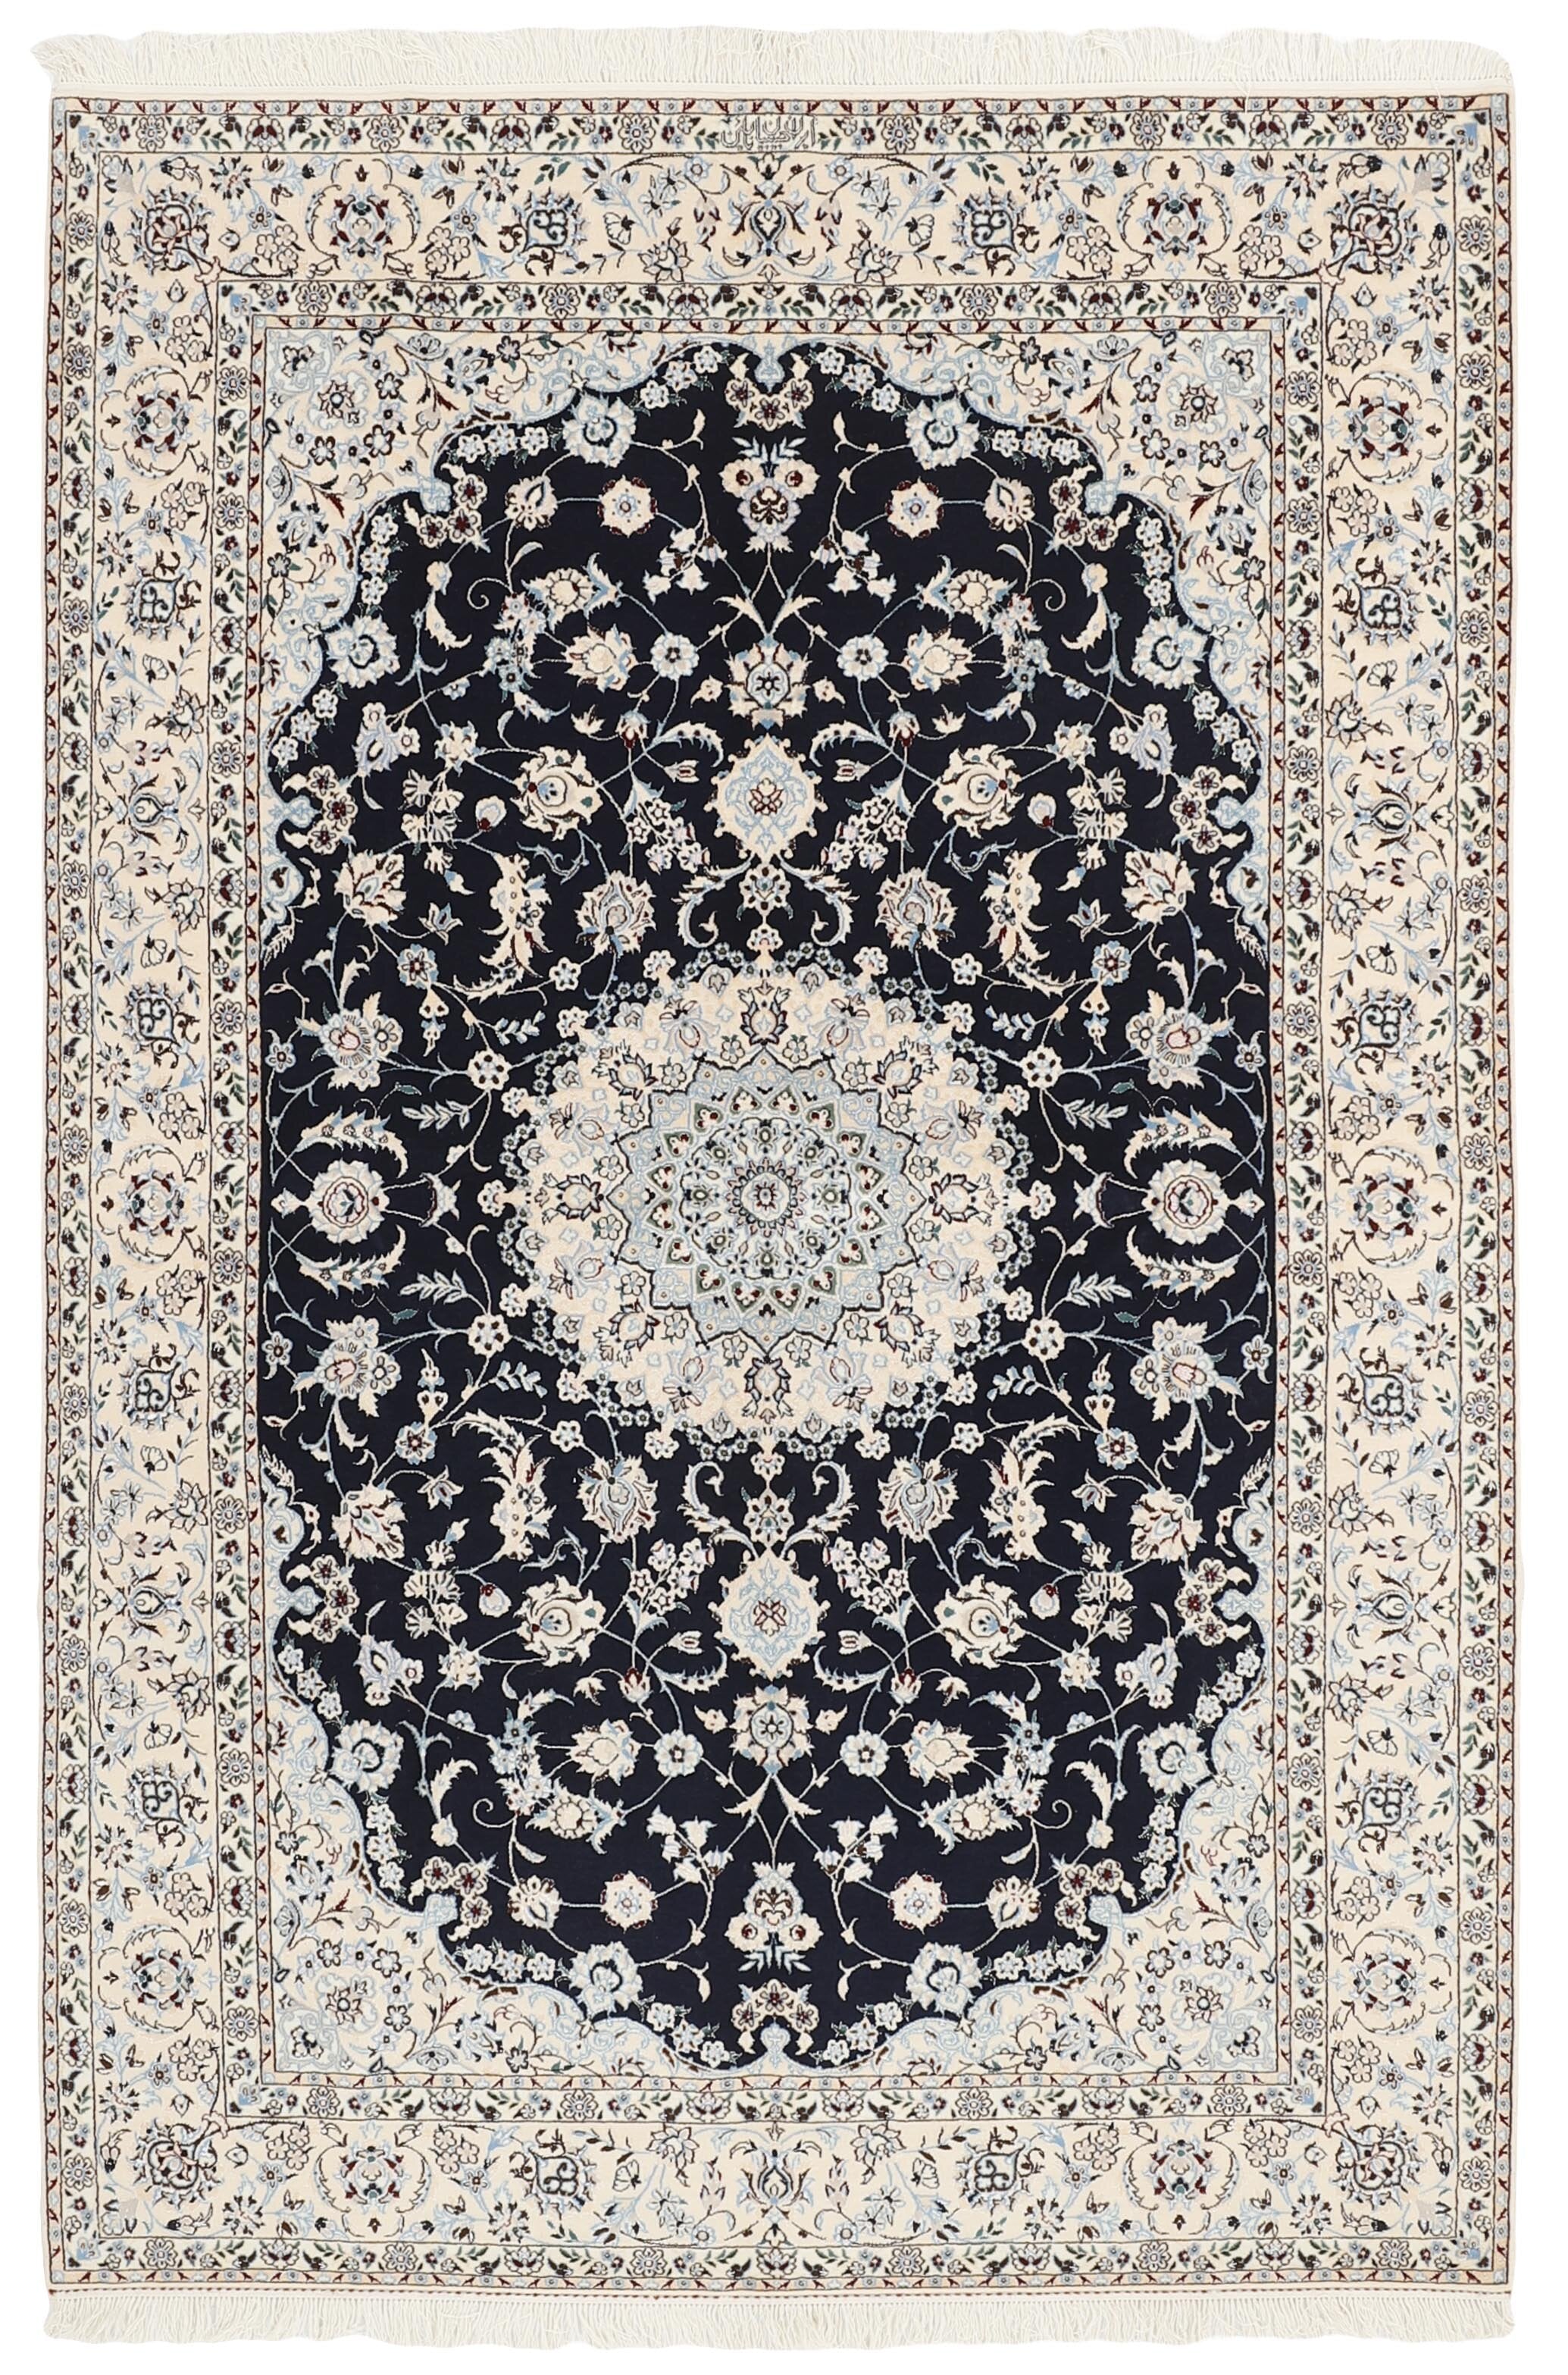 Authentic oriental rug with traditional floral design in cream, red and black